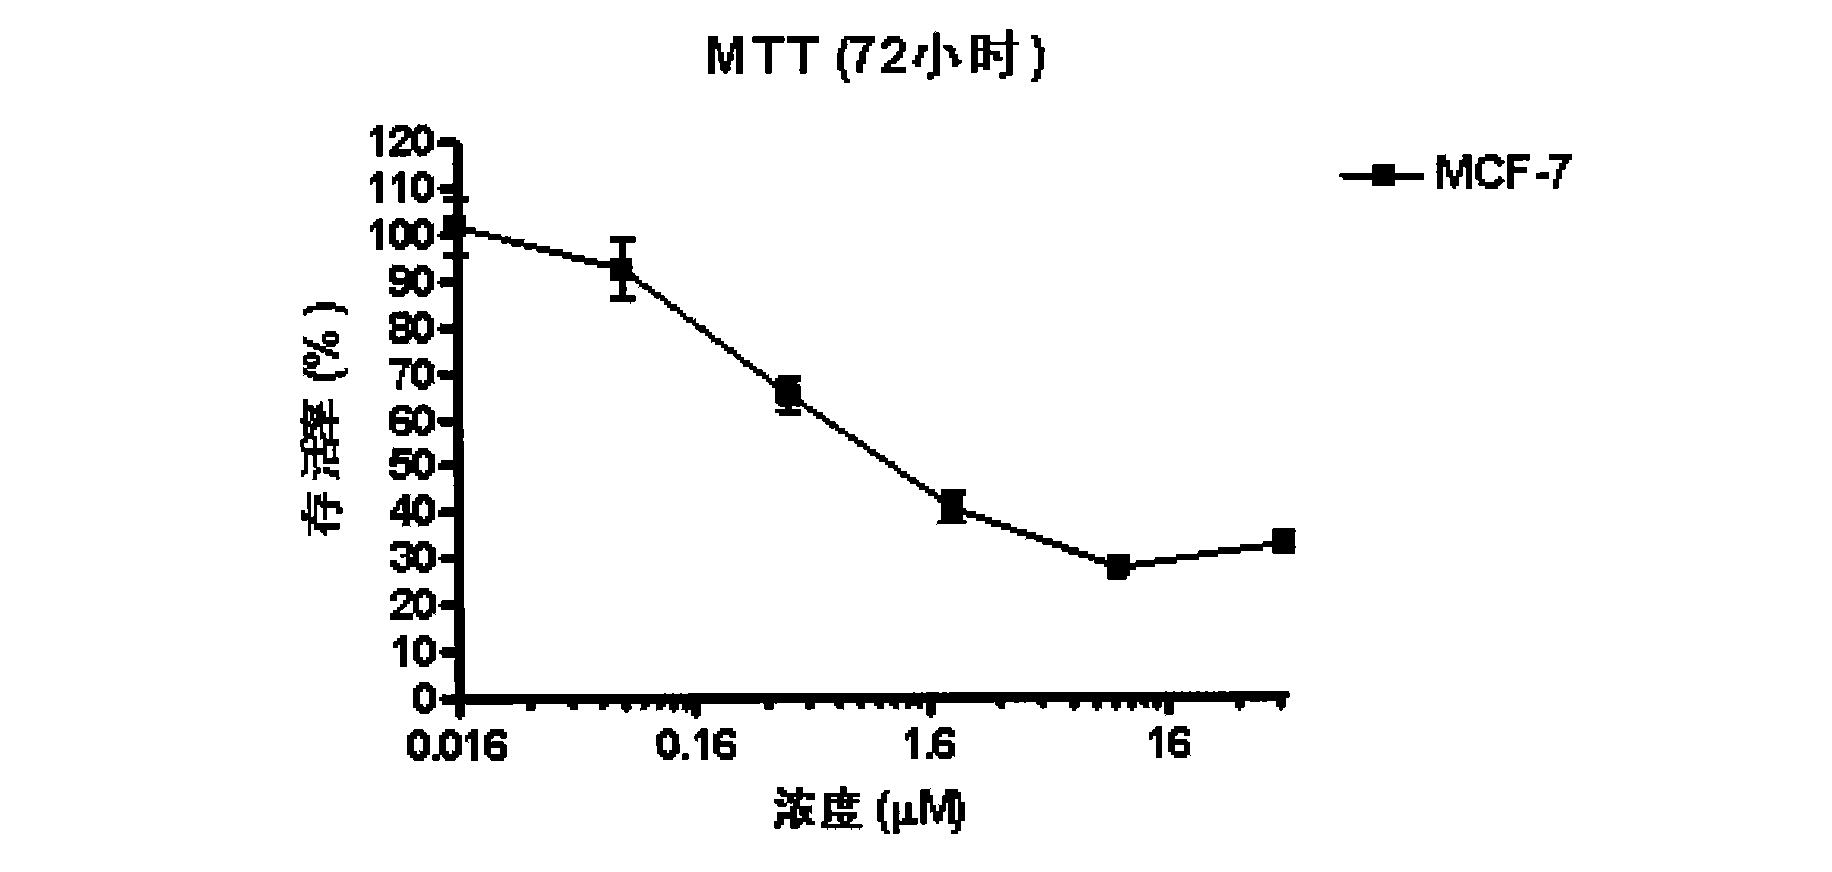 Application of compound as JAK-STAT3 signal passage inhibitor